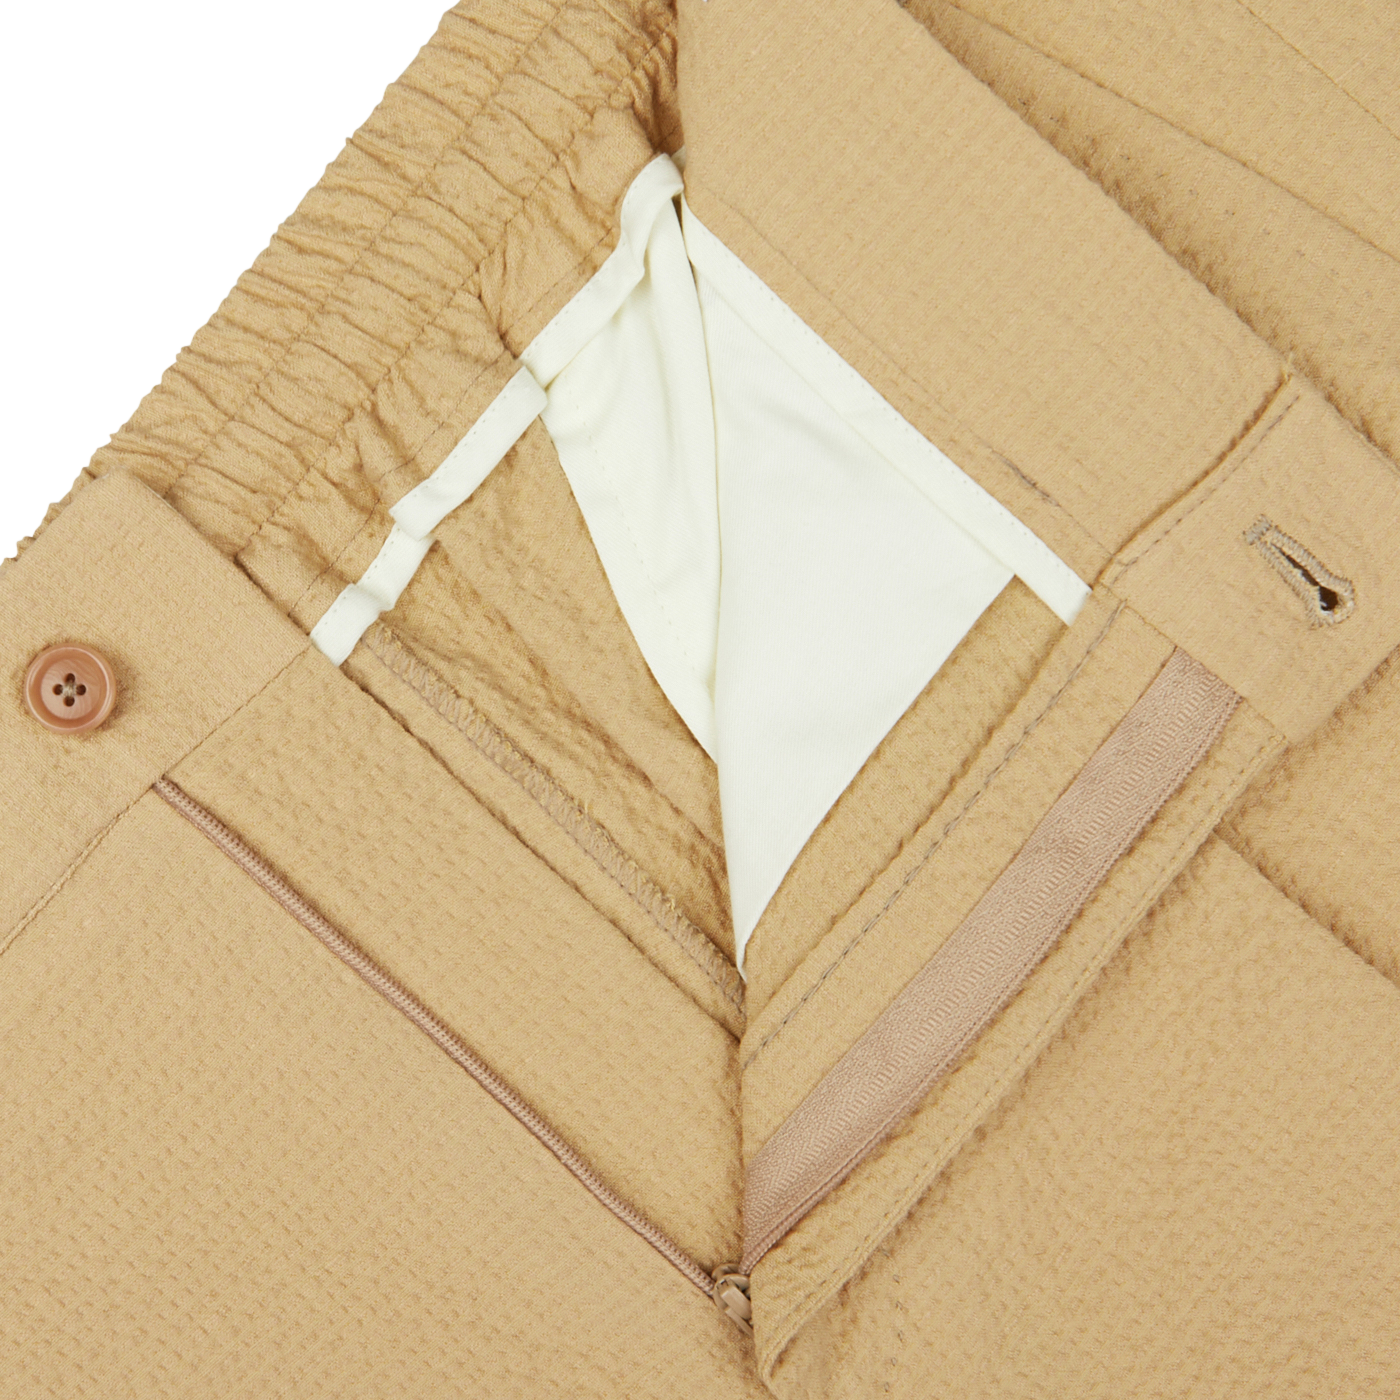 Close-up of a De Petrillo caramel beige casual jacket with a white shirt collar detail.